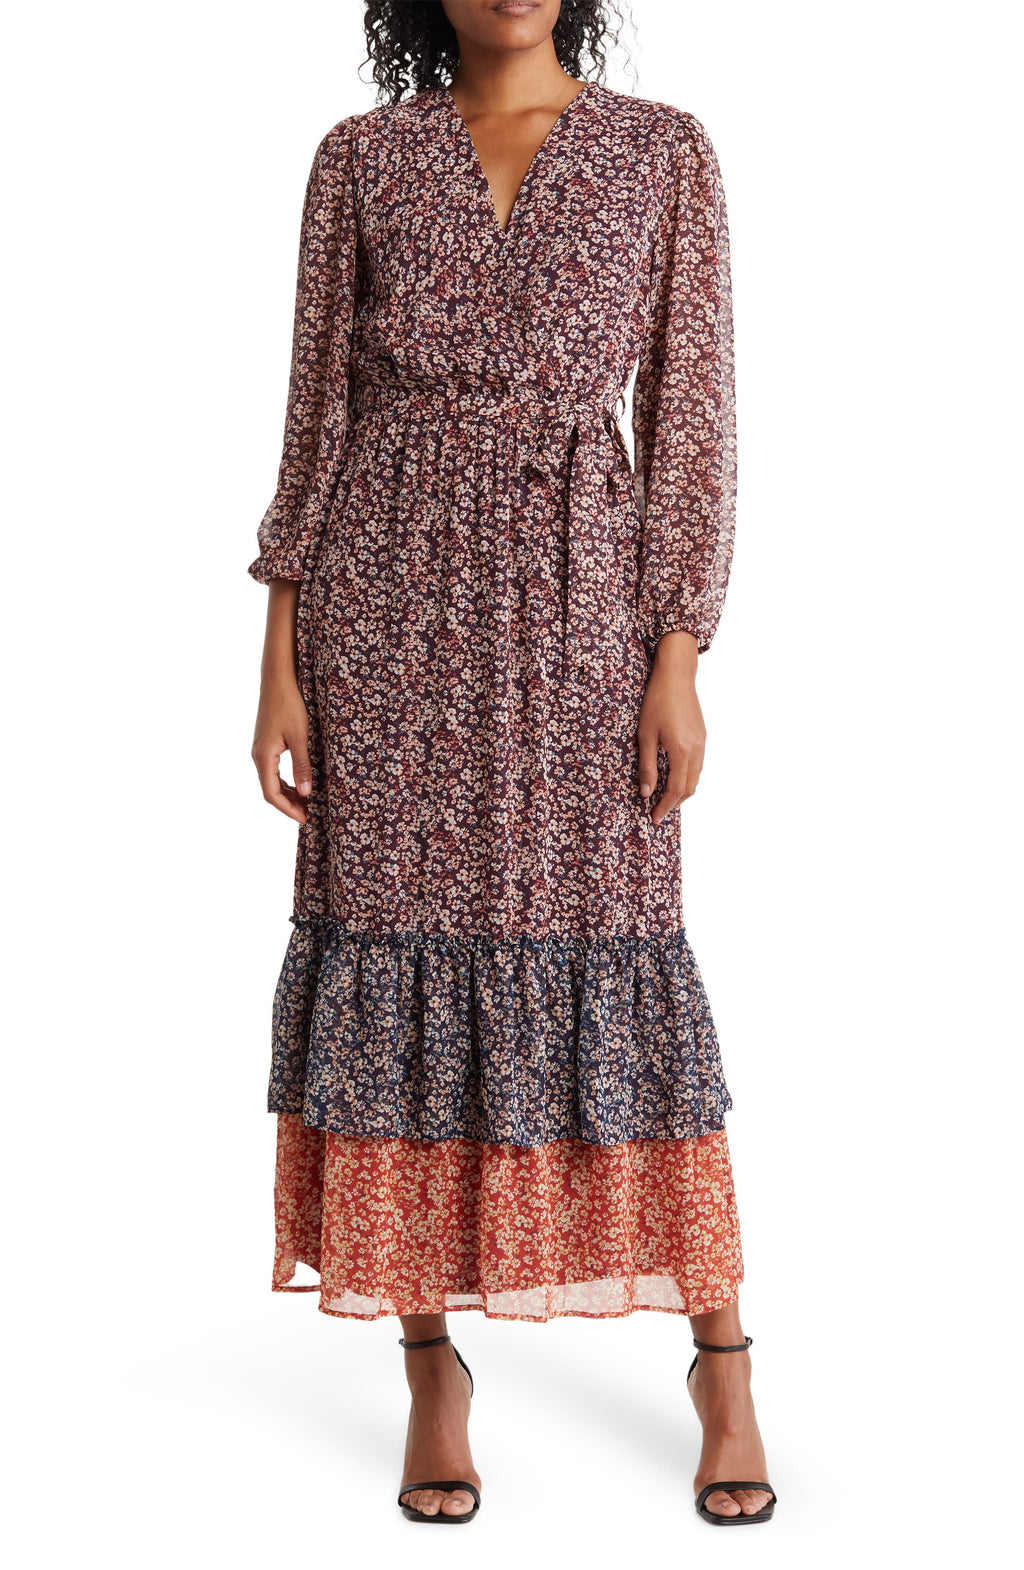 COLLECTIVE CONCEPTS Long Sleeve Ruffle Hem Dress, Main, color, BROWN FLORAL